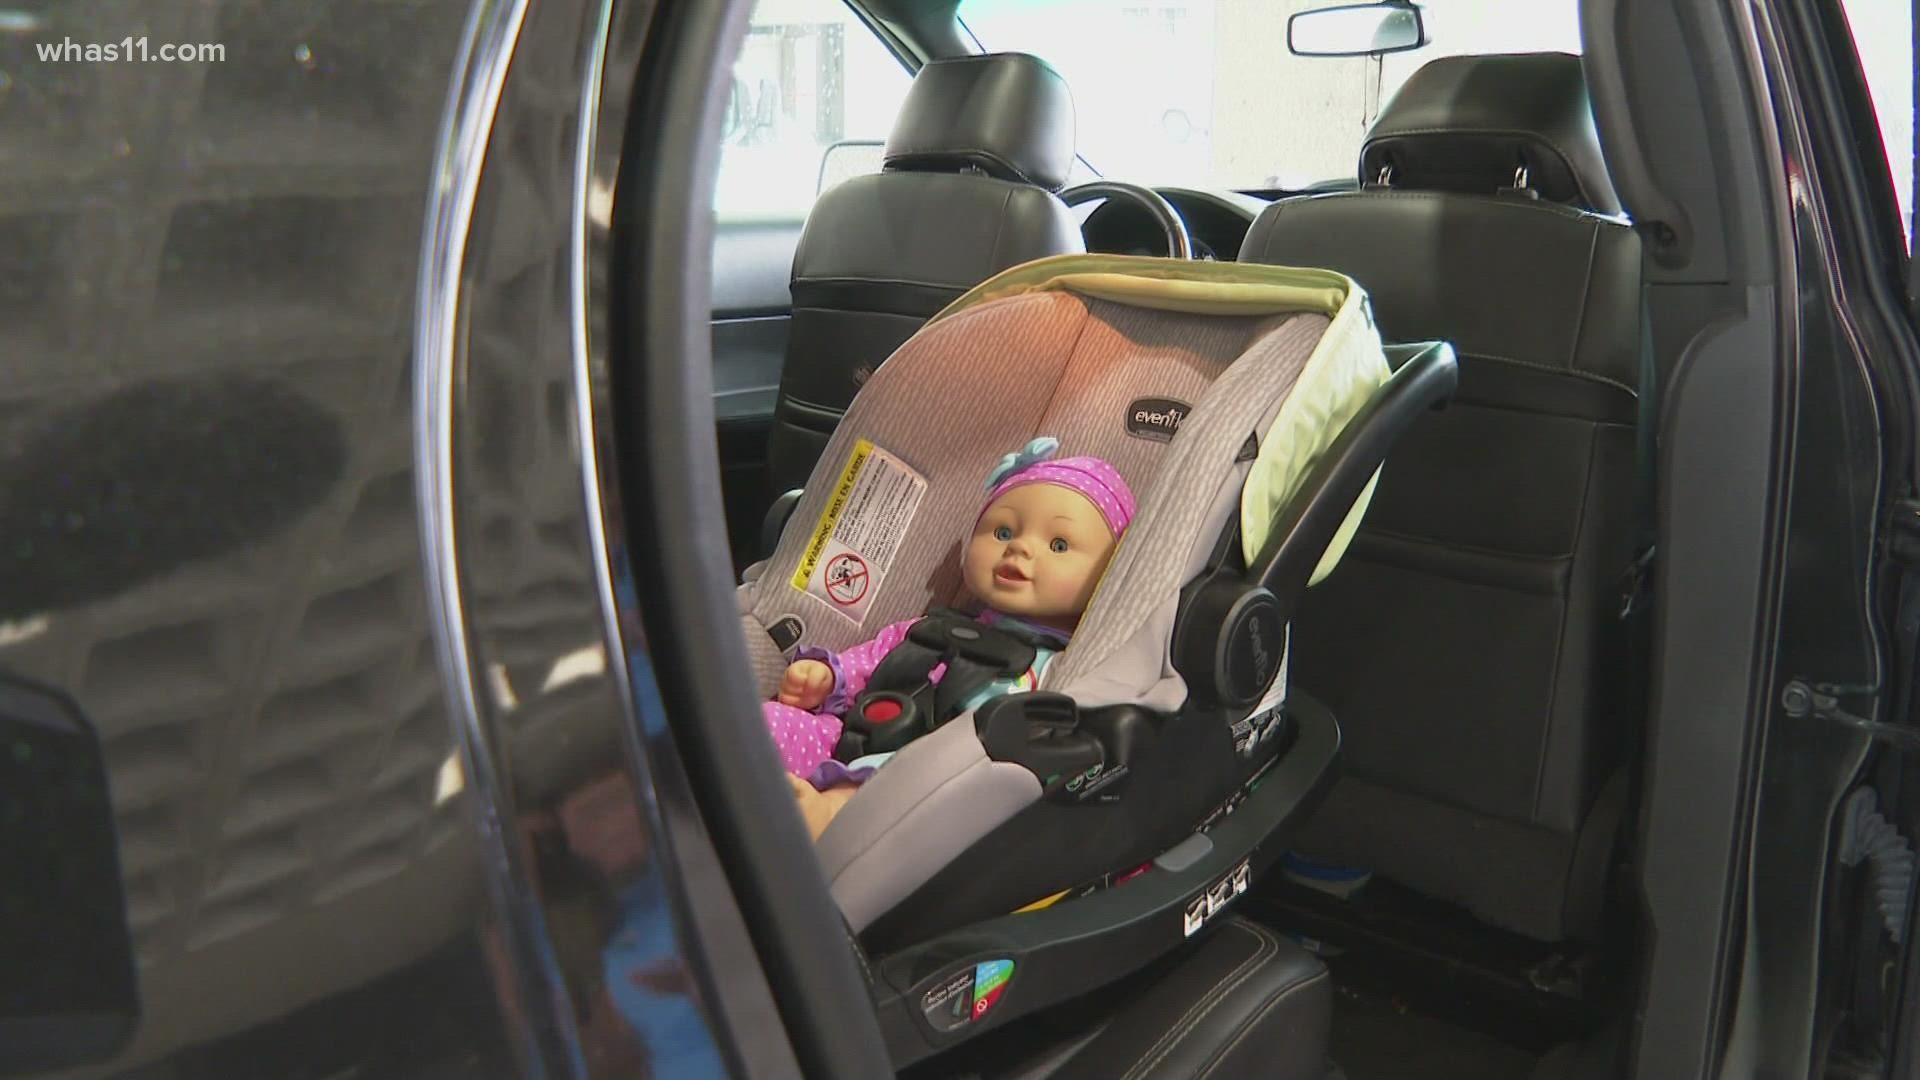 According to SafeKids.org, more than half of all car seats are installed incorrectly.